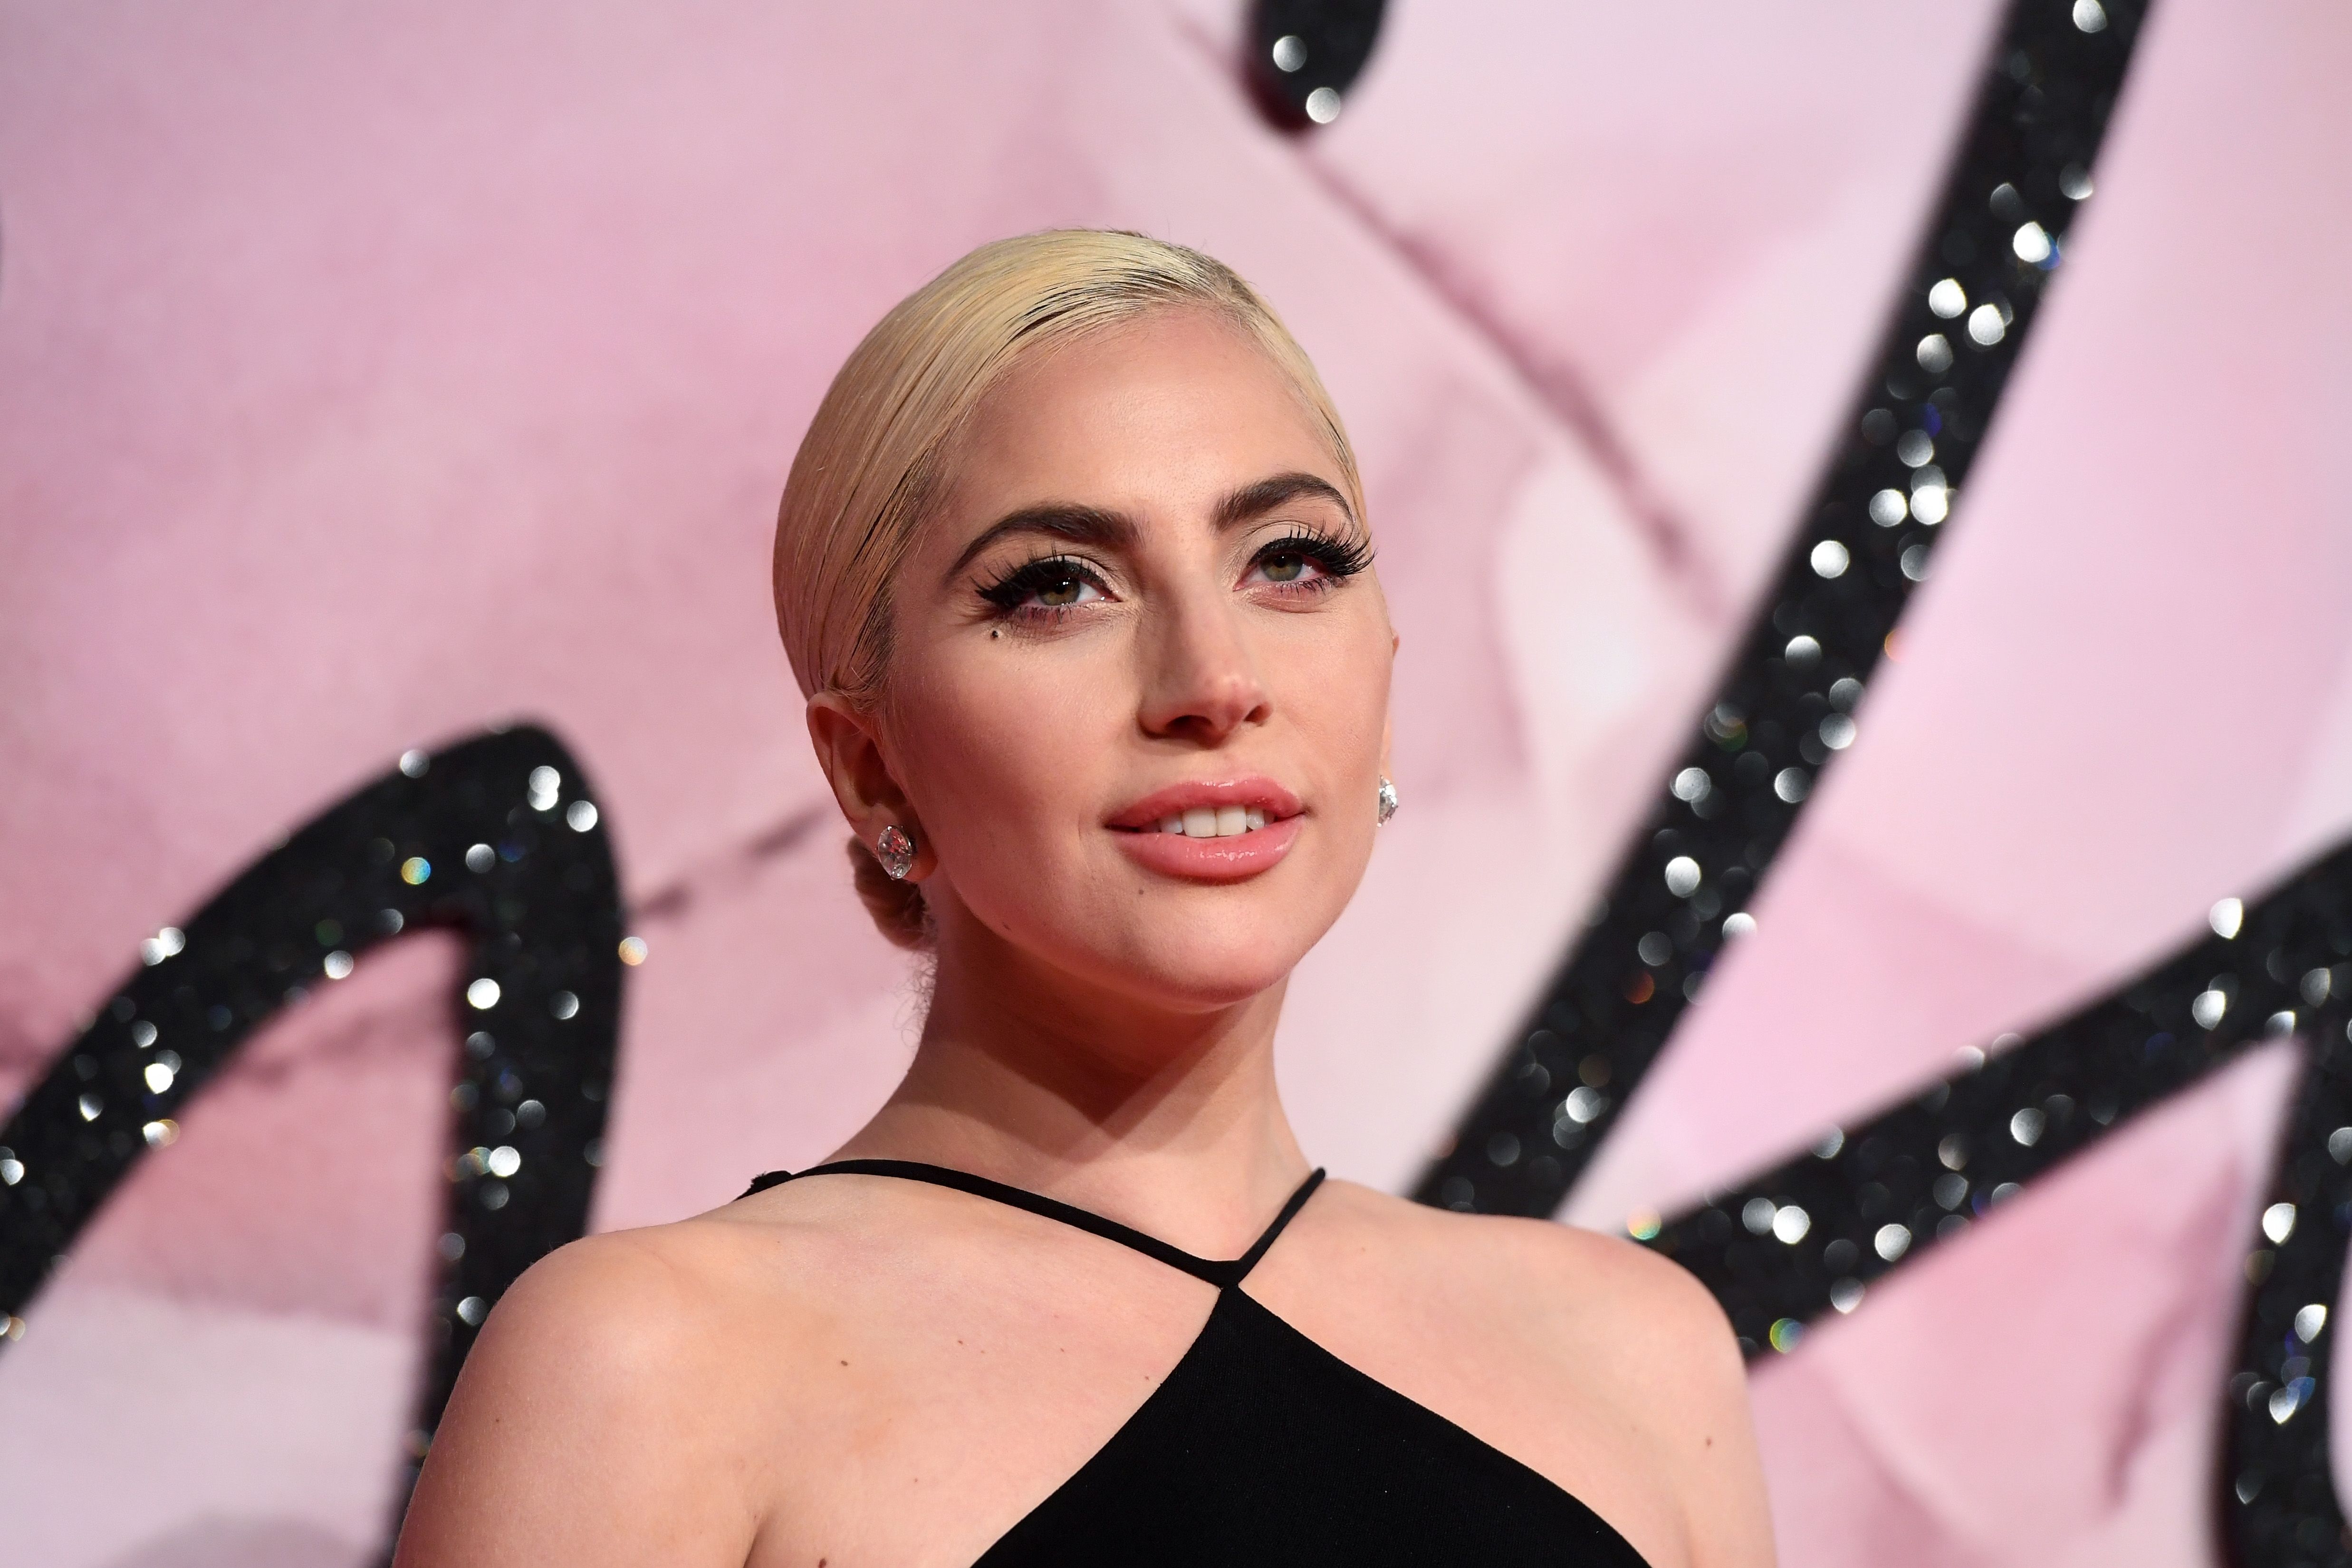 Who is lady gaga dating 2018